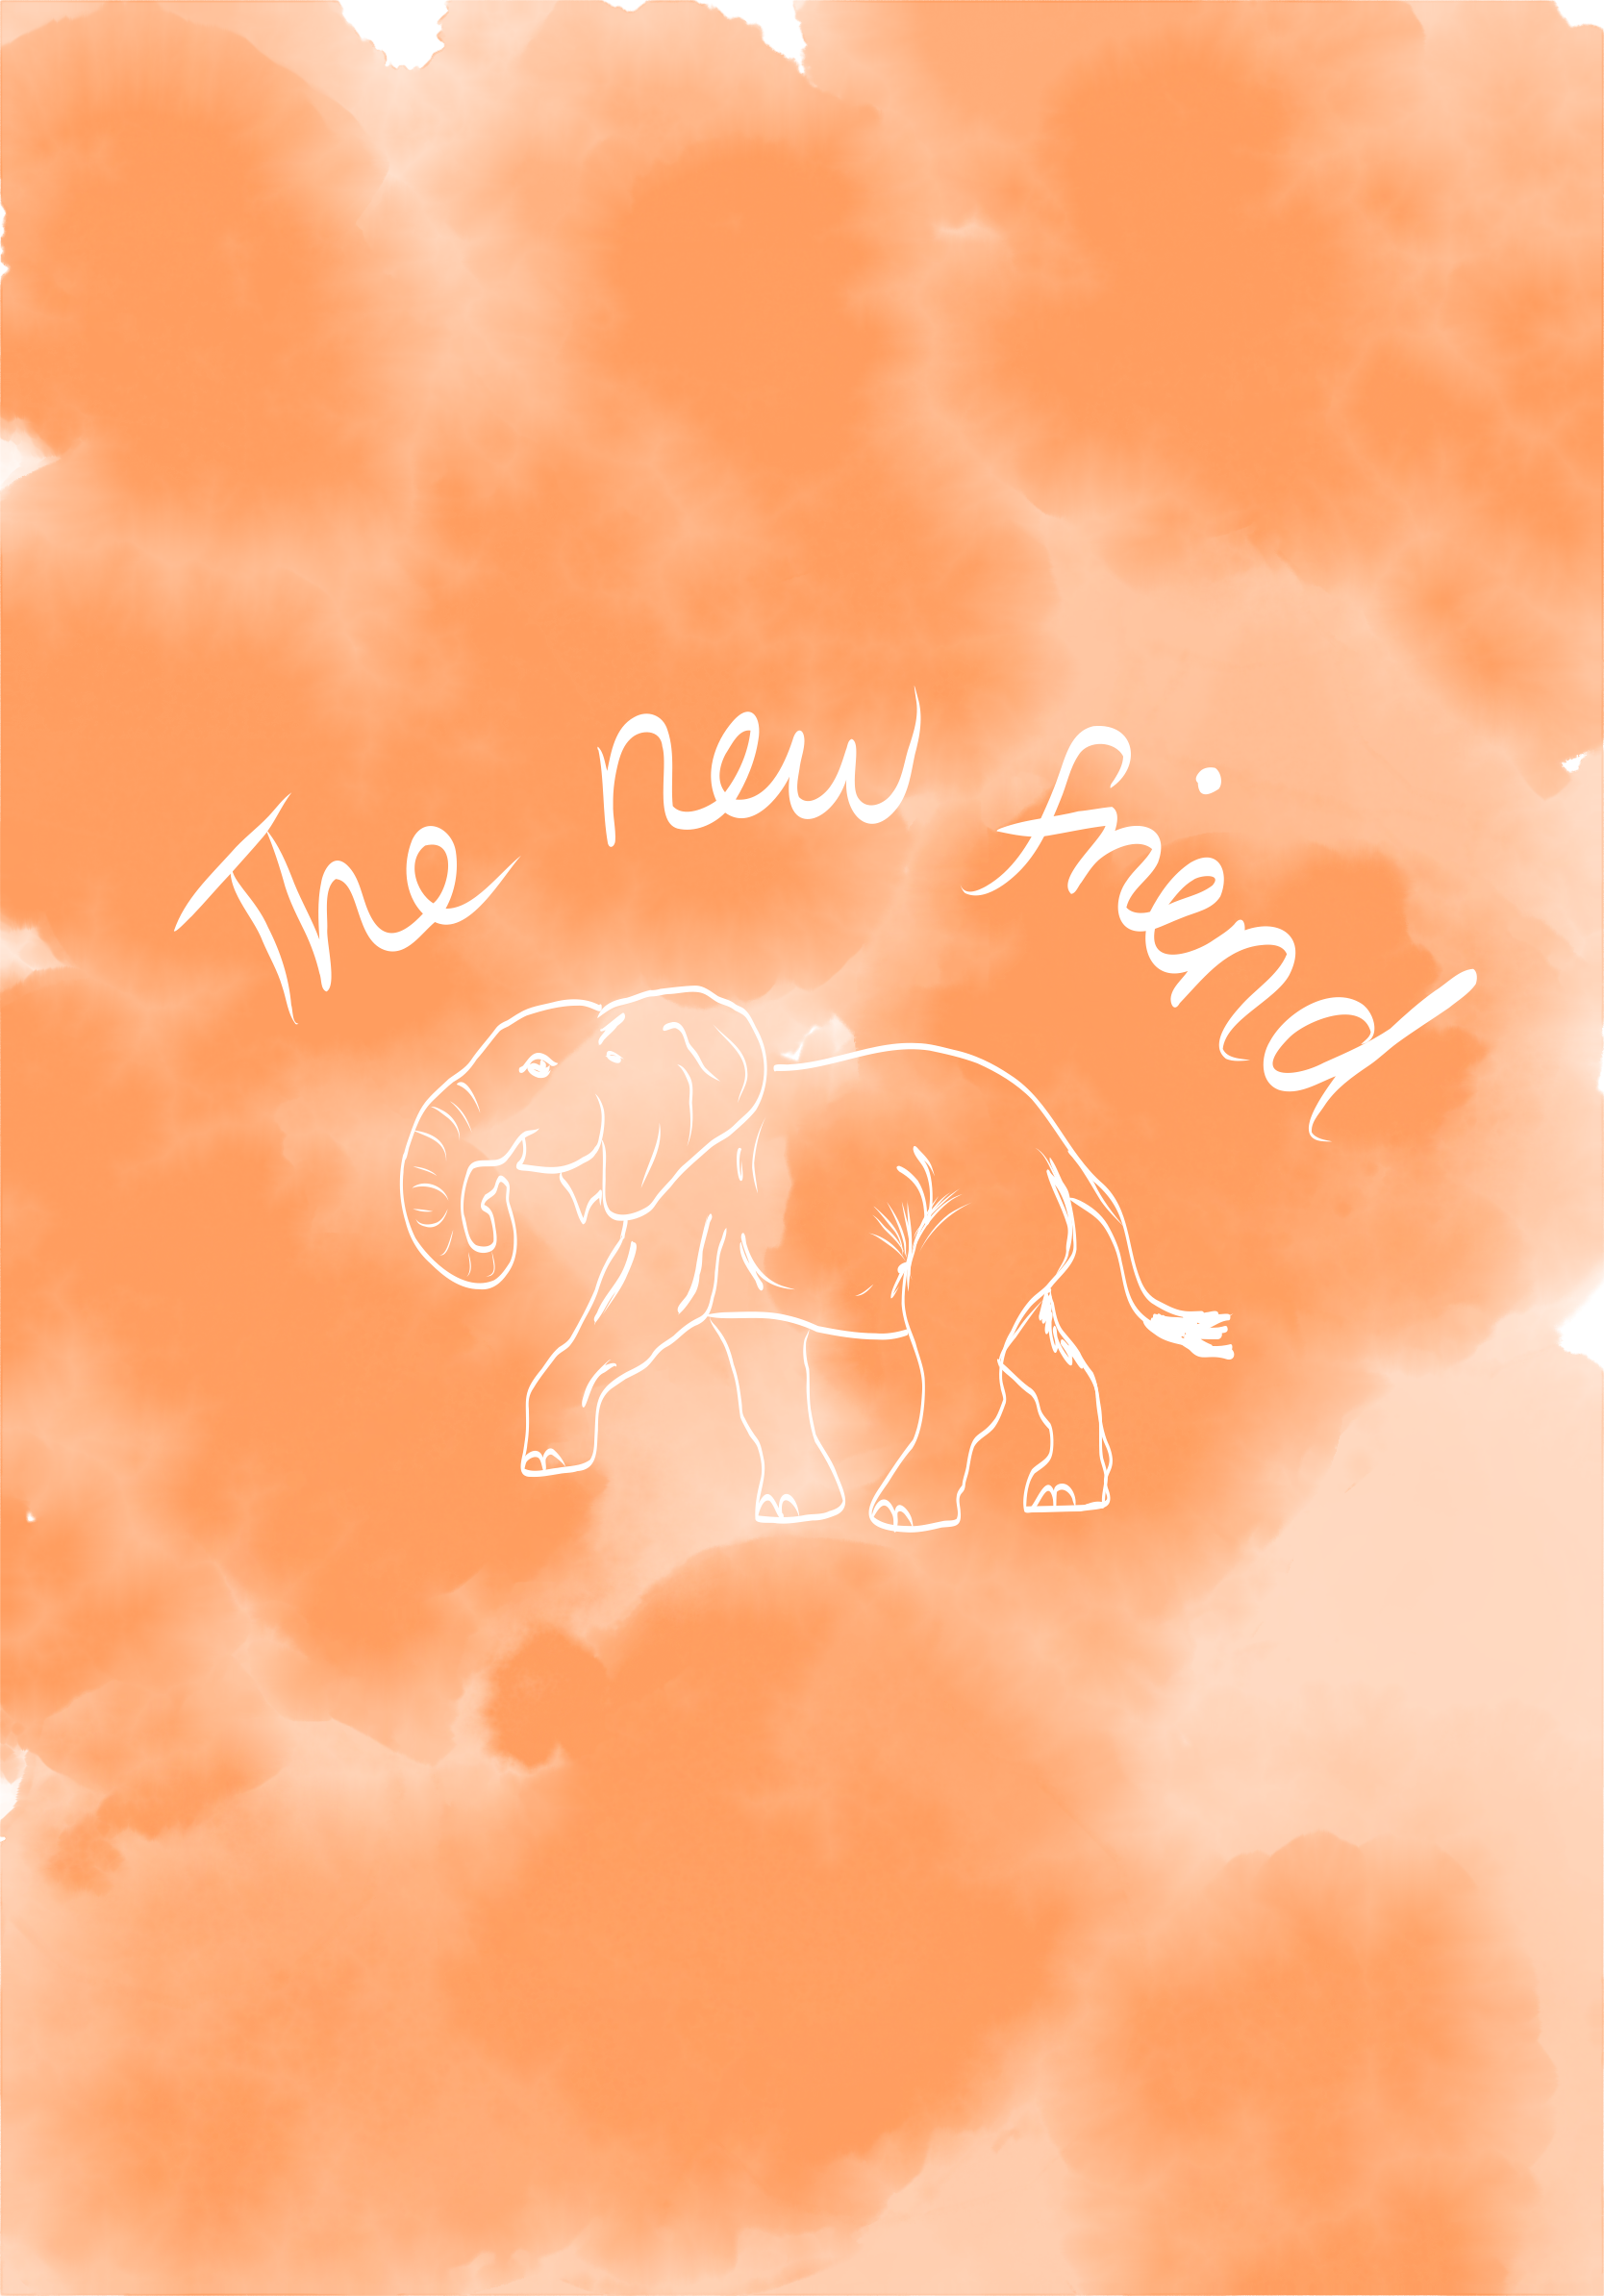 The New Friend by Lekha